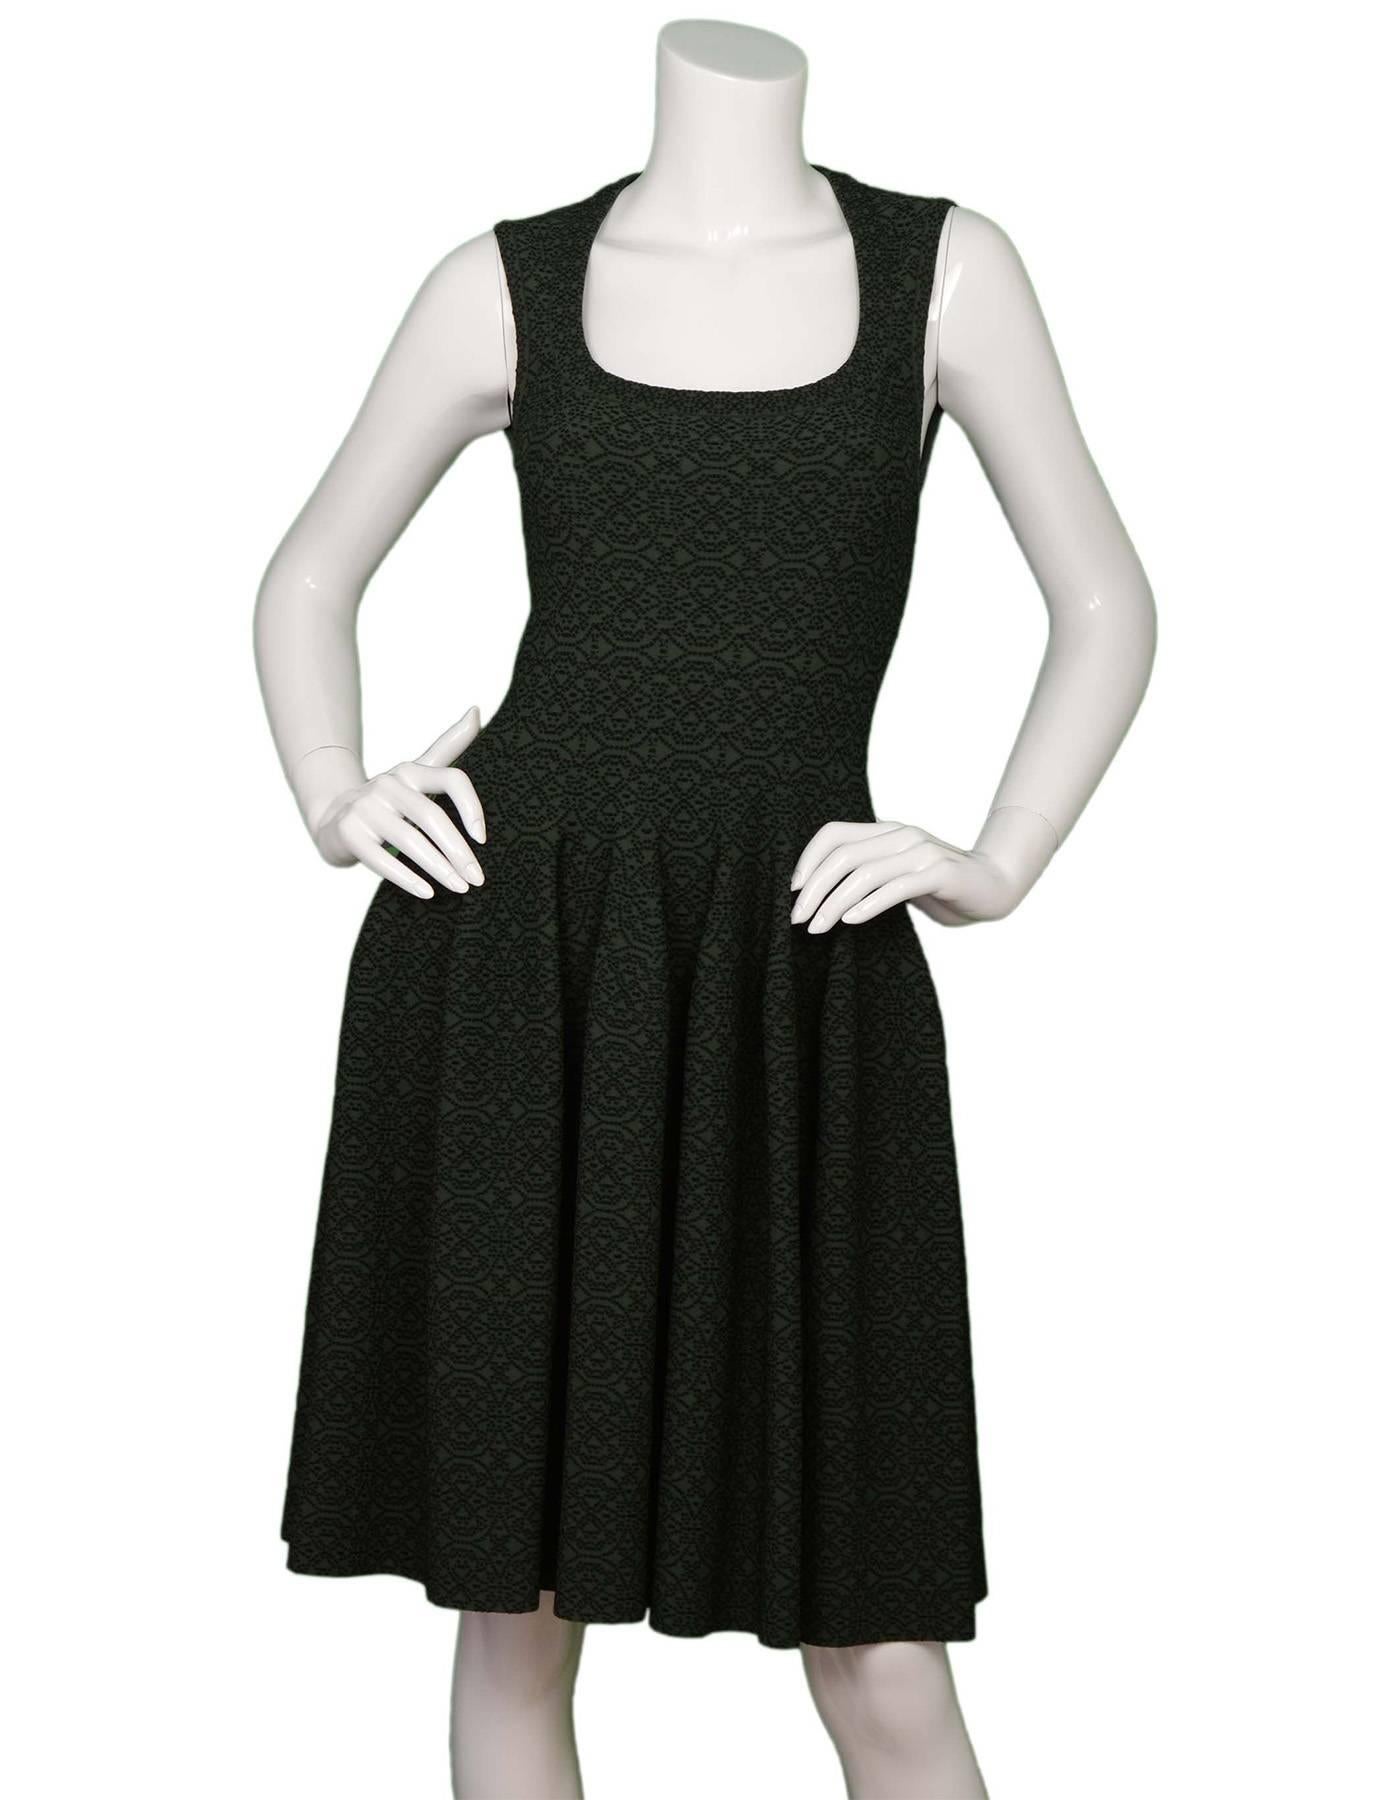 Alaia Dark Green Sleeveless Fit Flare Dress
Features black dotted pattern throughout

Made in: Italy
Color: Dark green and black
Composition: 68% viscose, 21% nylon, 7% polyester, 4% elastane 
Lining: None
Closure/opening: Back center zip